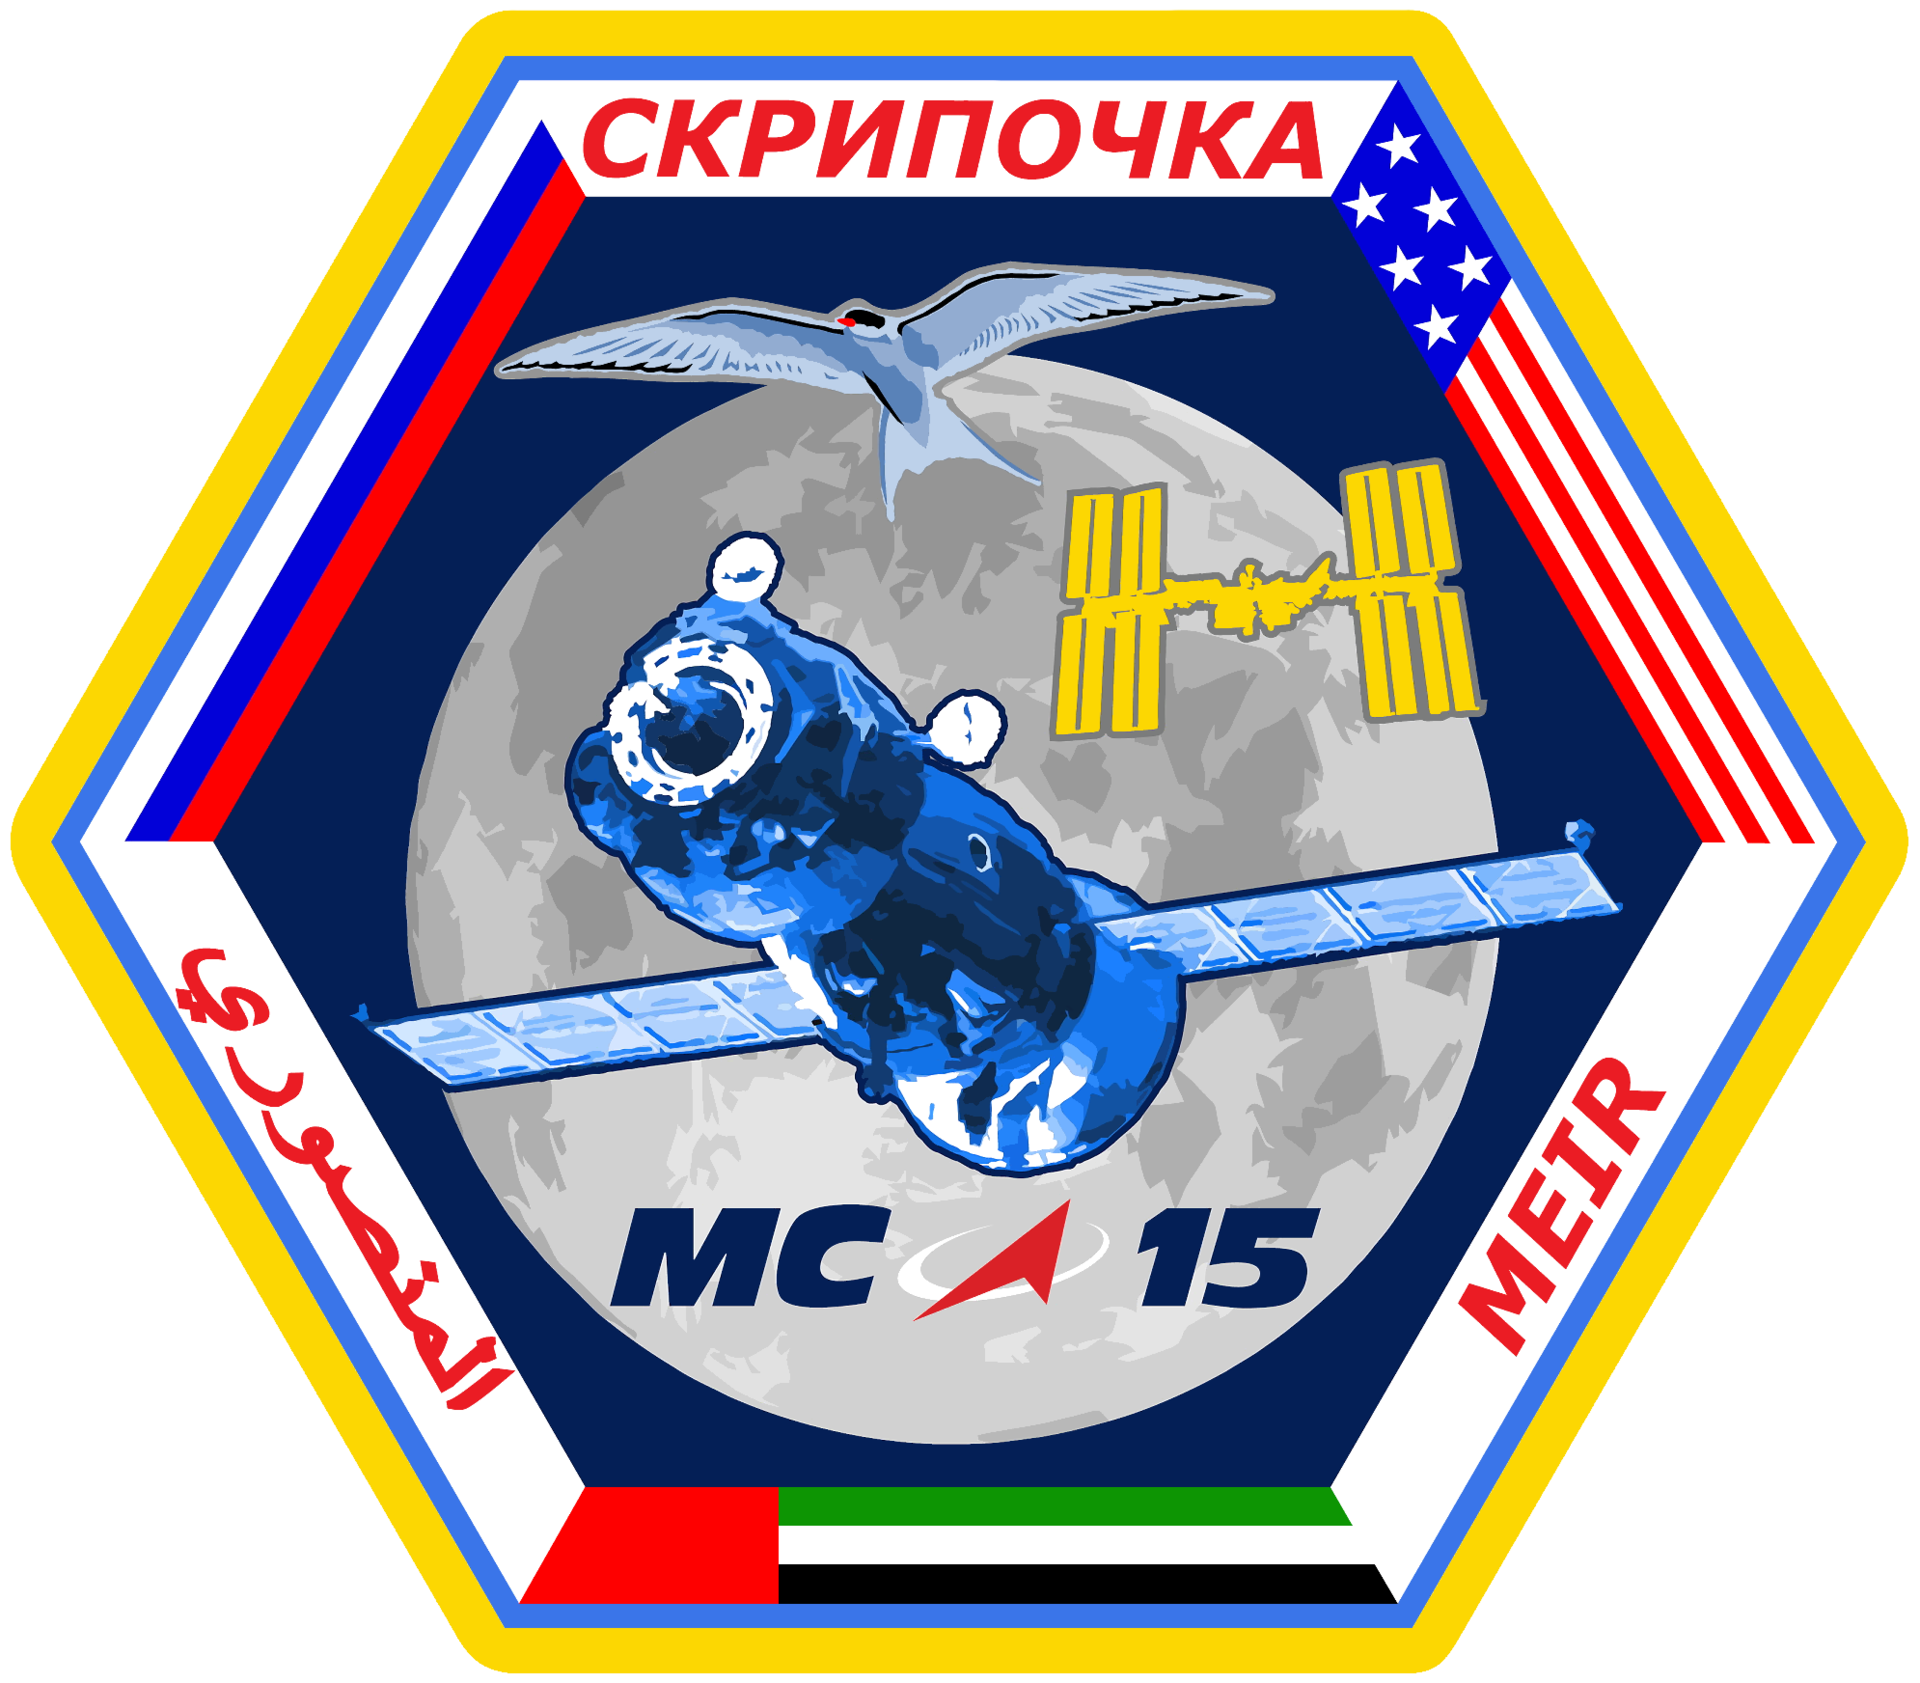 Mission patch for Soyuz MS-15